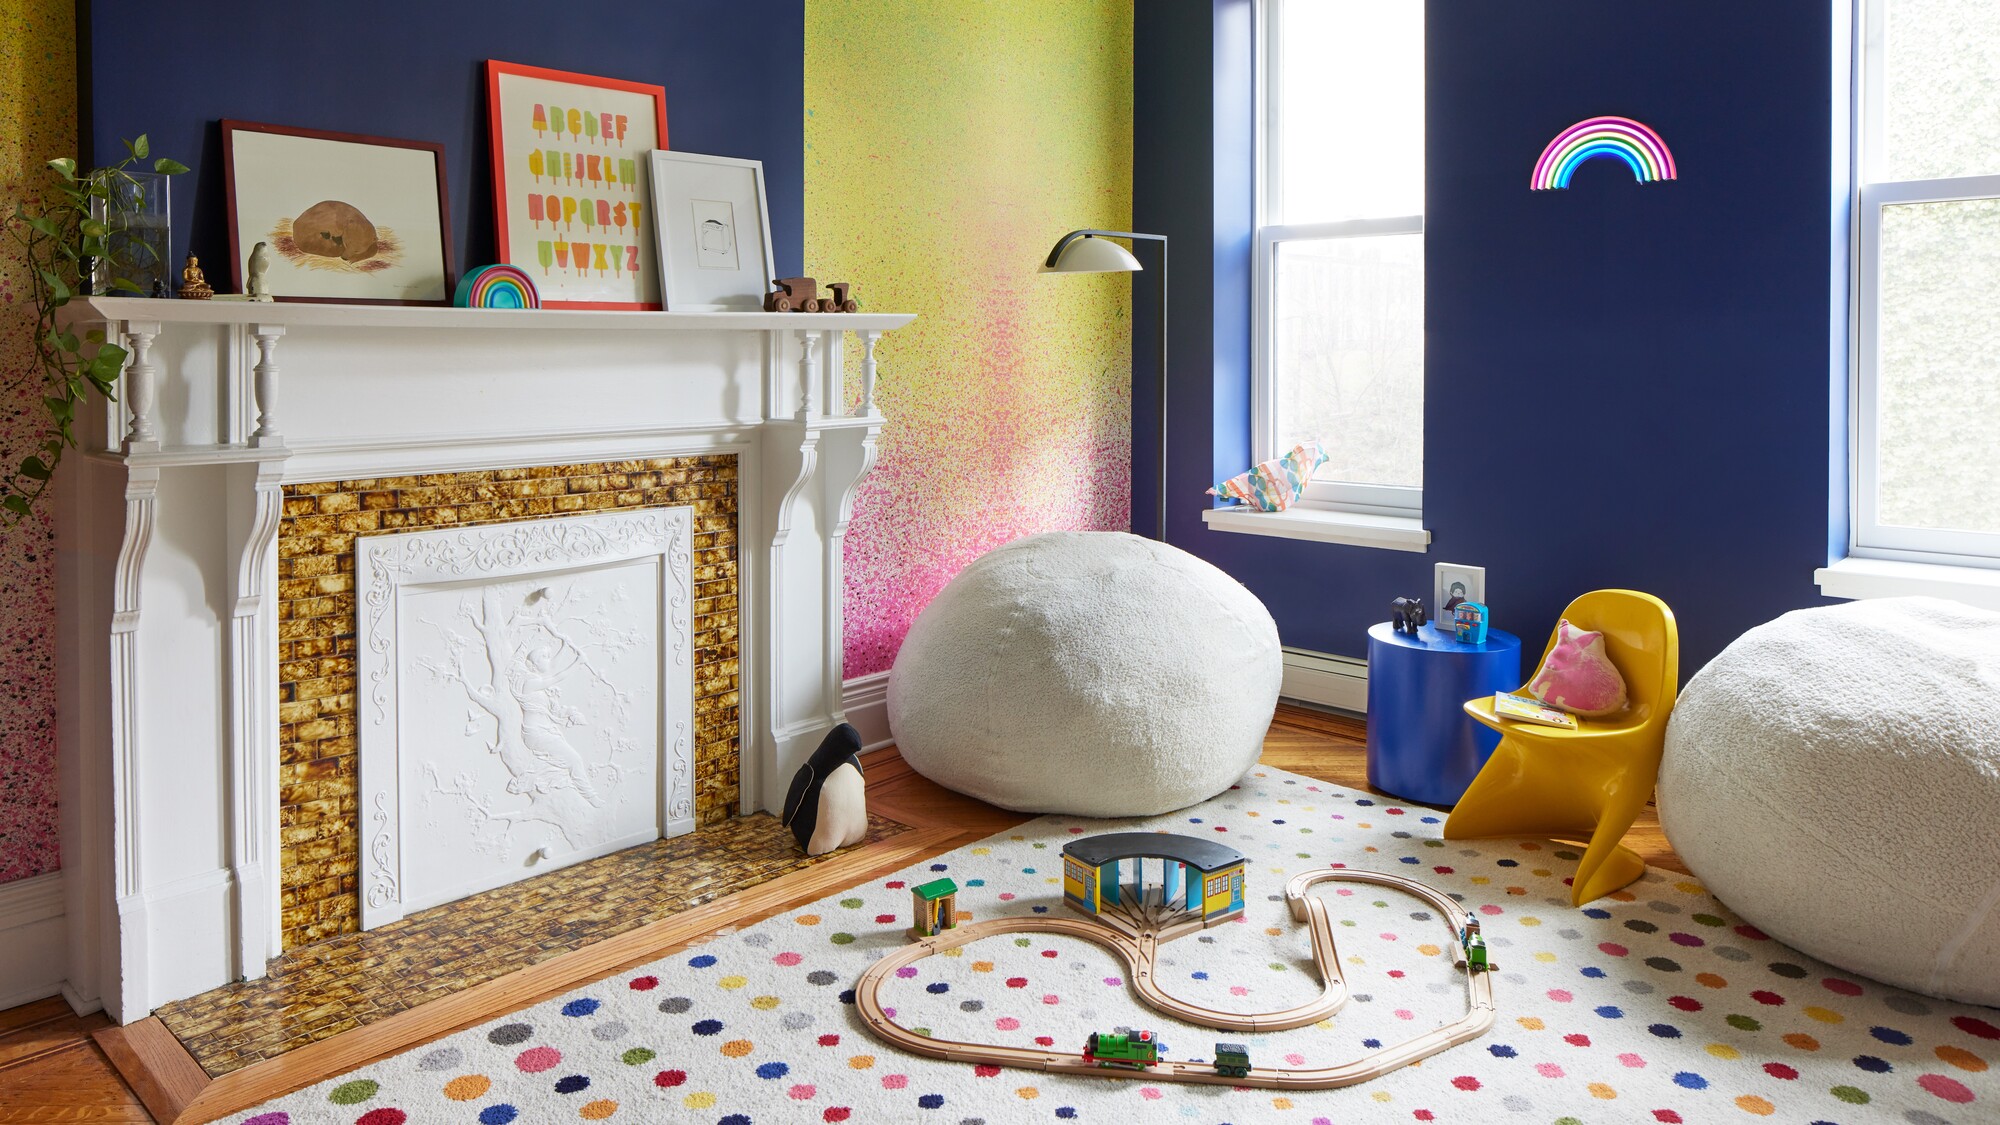 Choosing the Right Color for Your Kids’ Room